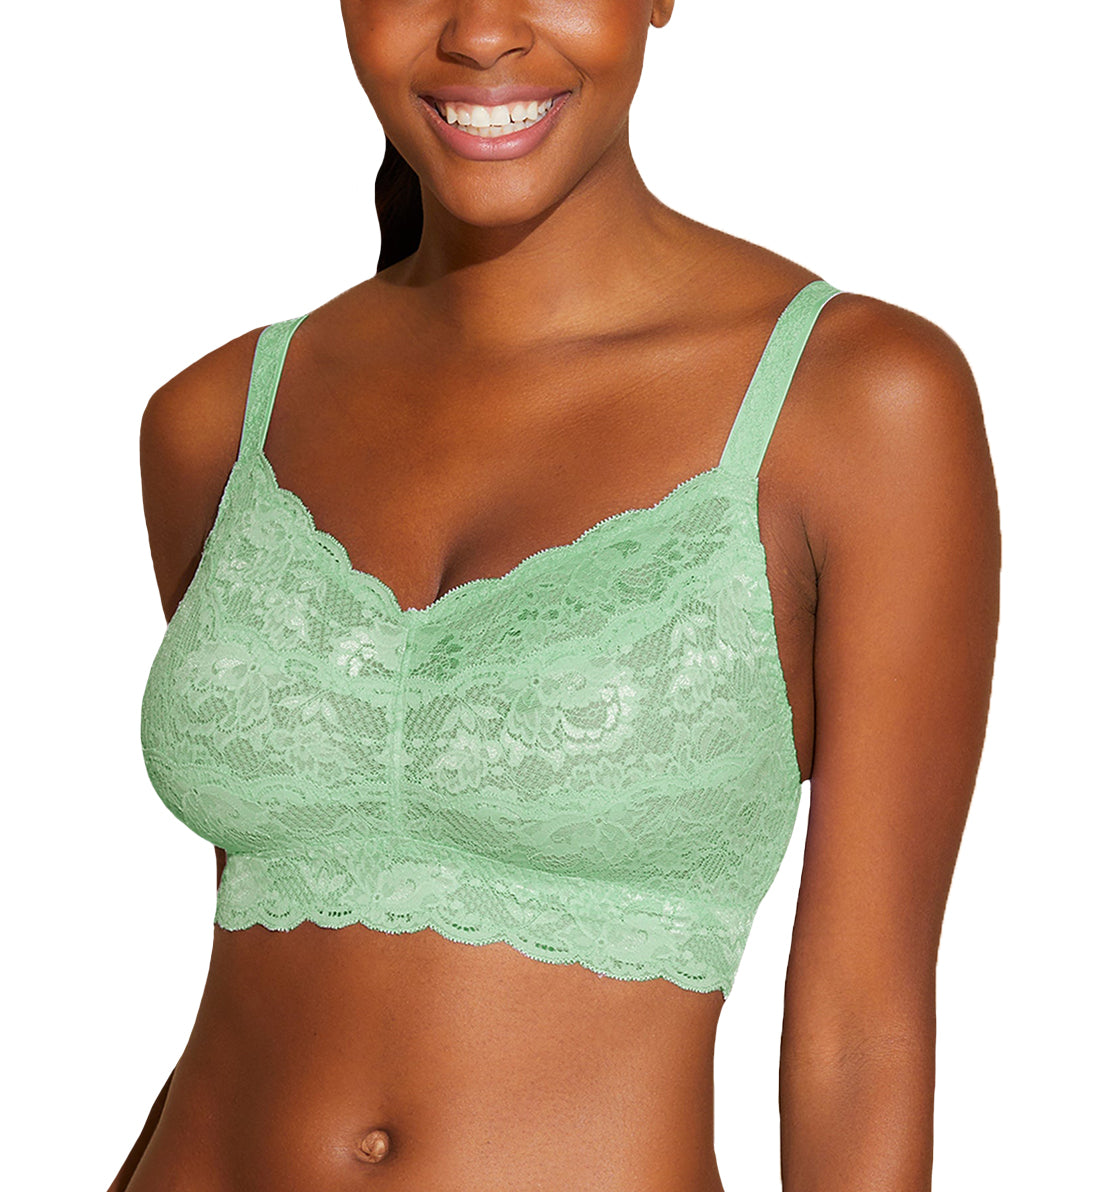 Cosabella Never Say Never CURVY Sweetie Bralette (NEVER1310),Petite,Ghana Green - Ghana Green,Petite